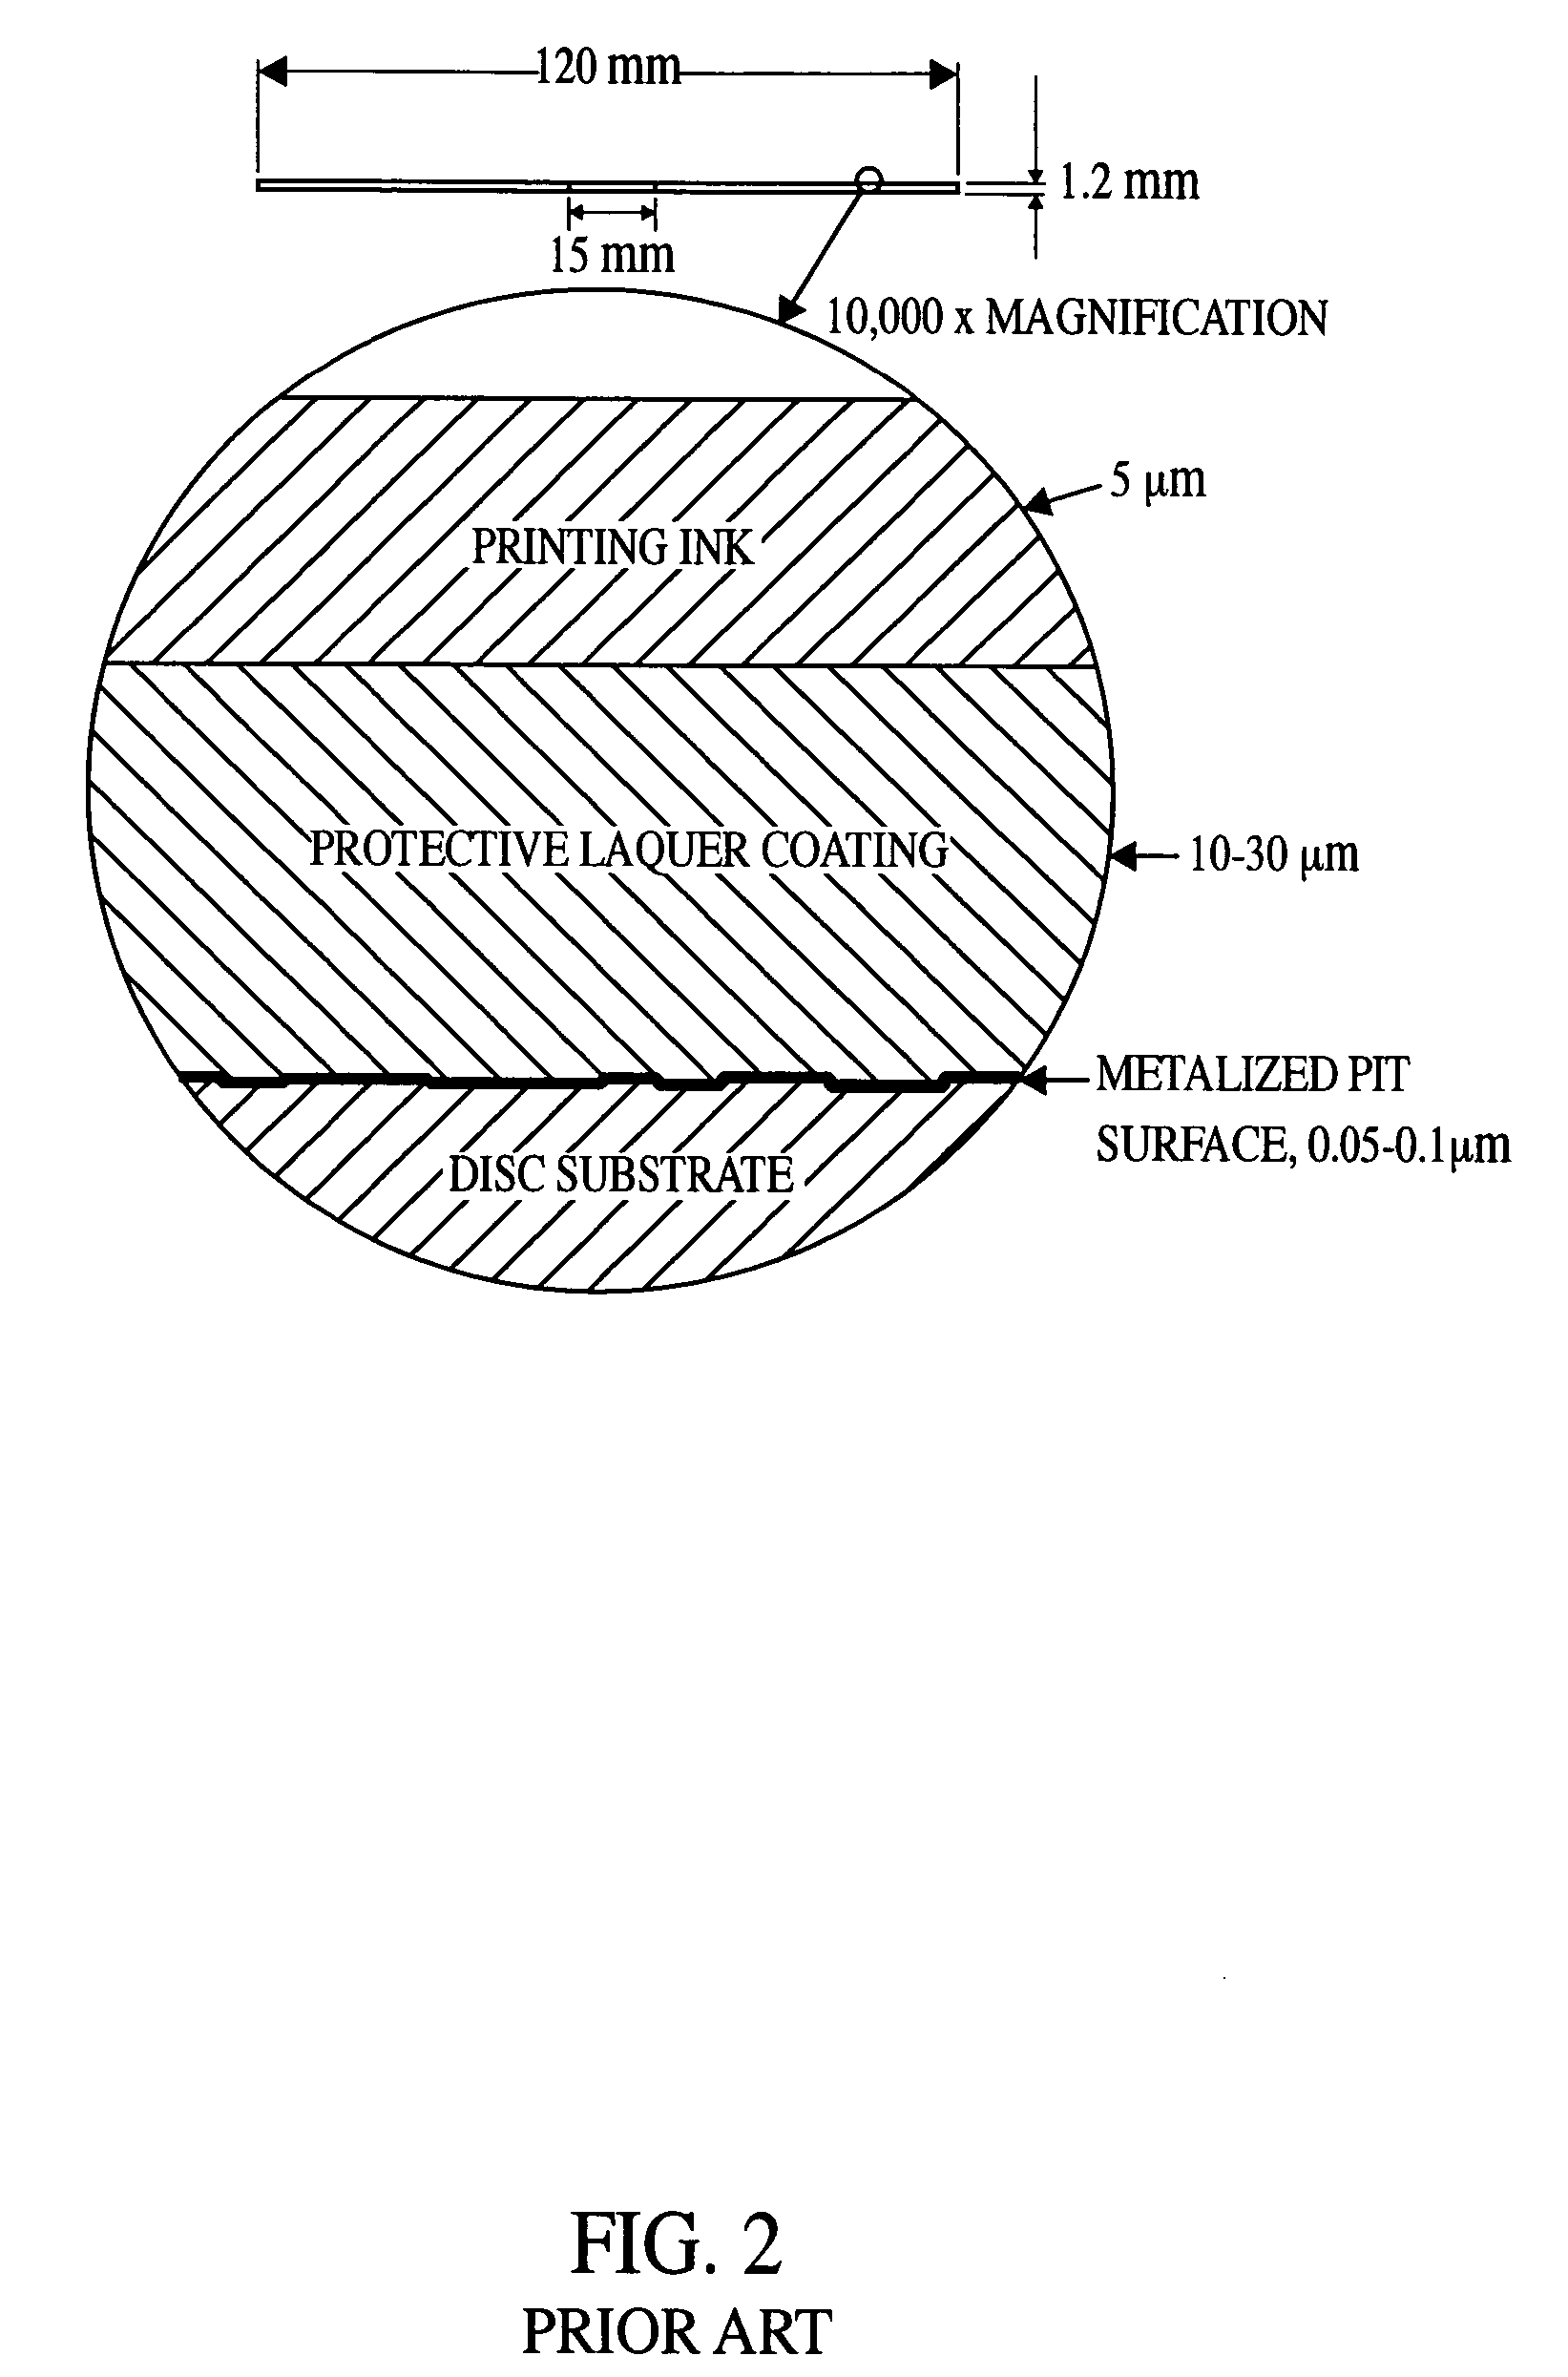 Method for minimizing pirating and/or unauthorized copying and/or unauthorized access of/to data on/from data media including compact discs and digital versatile discs, and system and data media for same